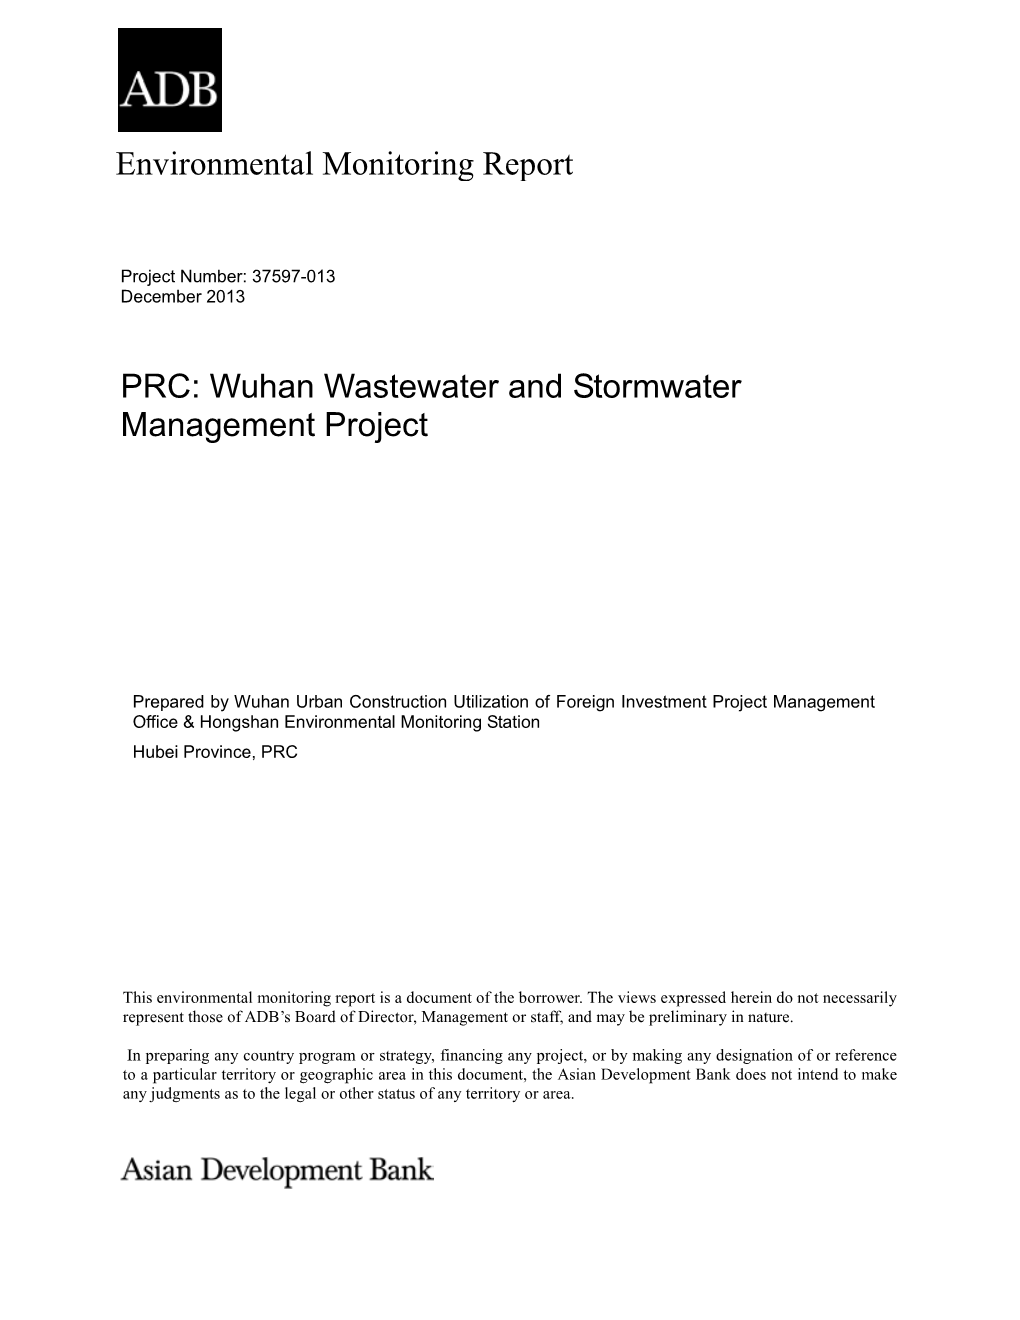 Wuhan Wastewater and Stormwater Management Project